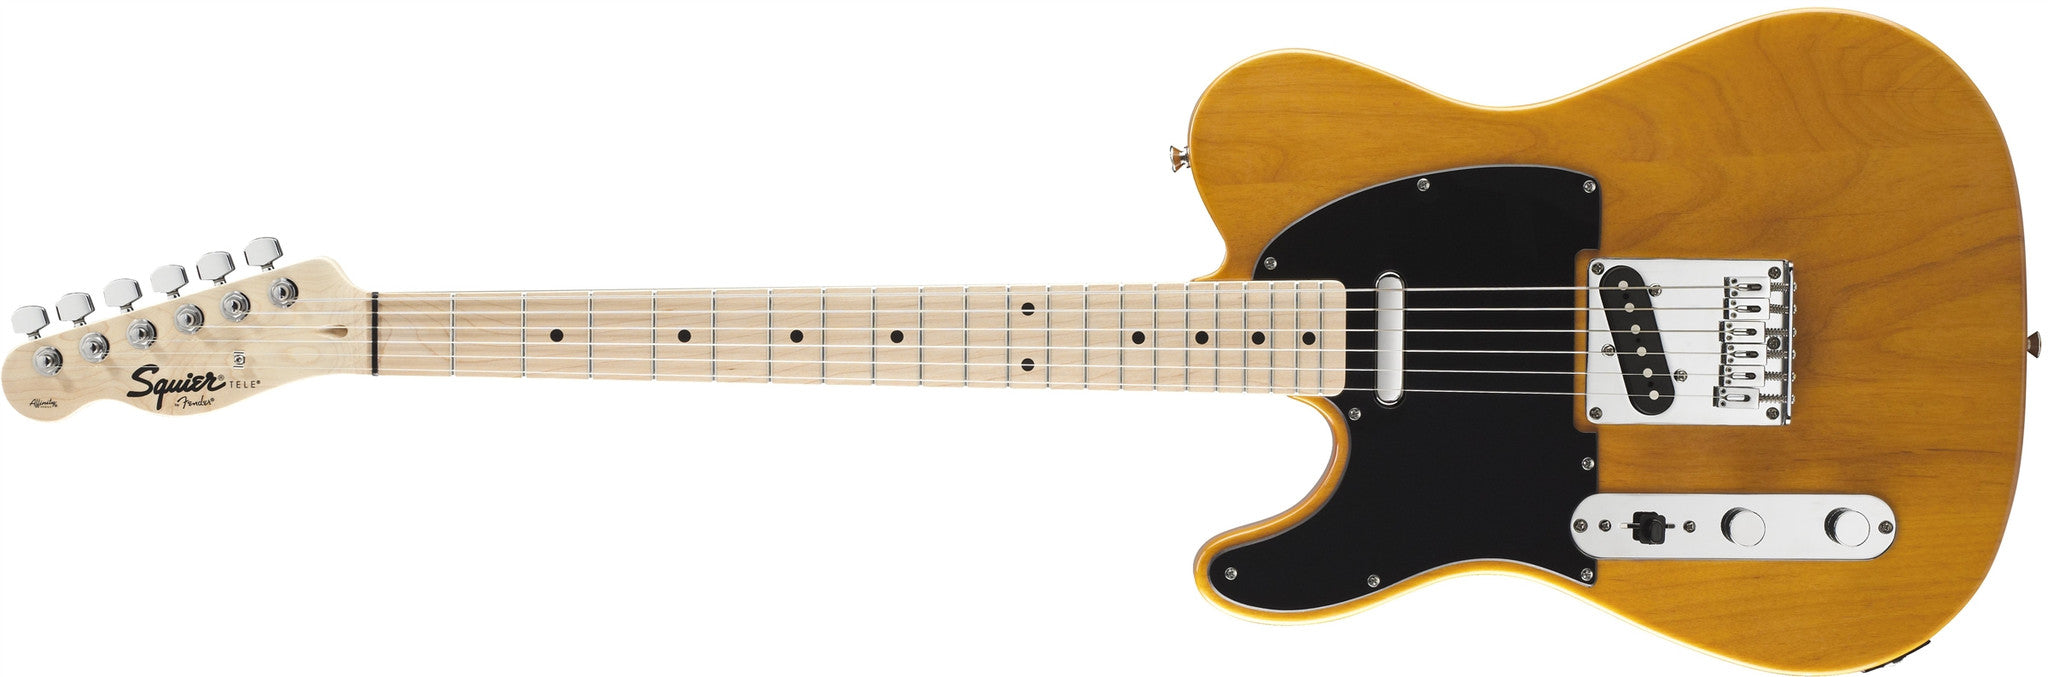 Squier Affinity Series Telecaster Left-Handed, Maple Fingerboard, Butterscotch Blonde 0310223550